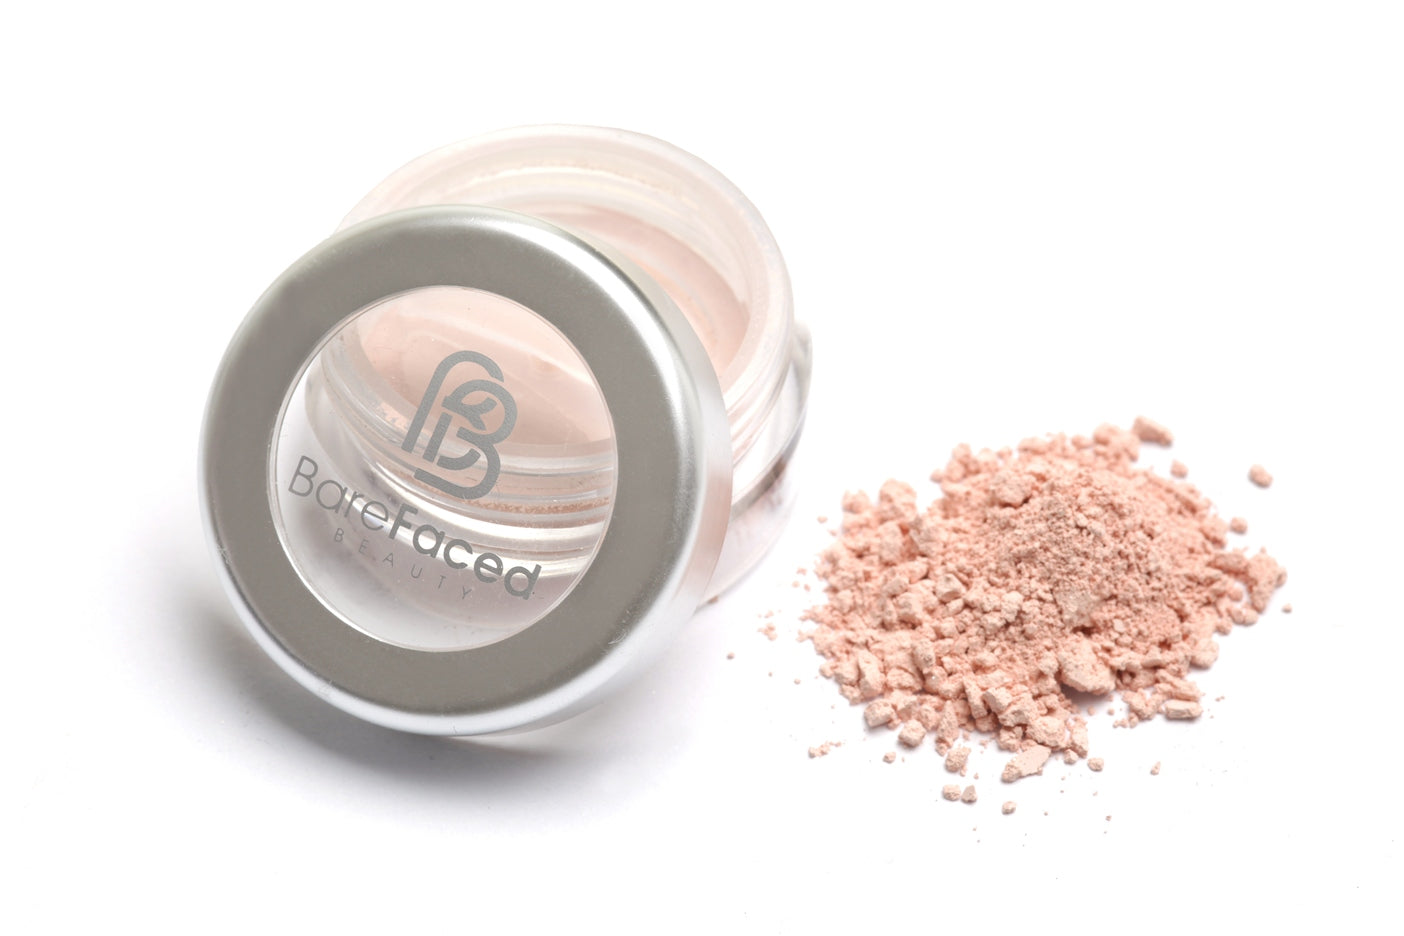 A small round pot of mineral eyeshadow, with a swatch of the powder next to it showing a matt very pale pink shade